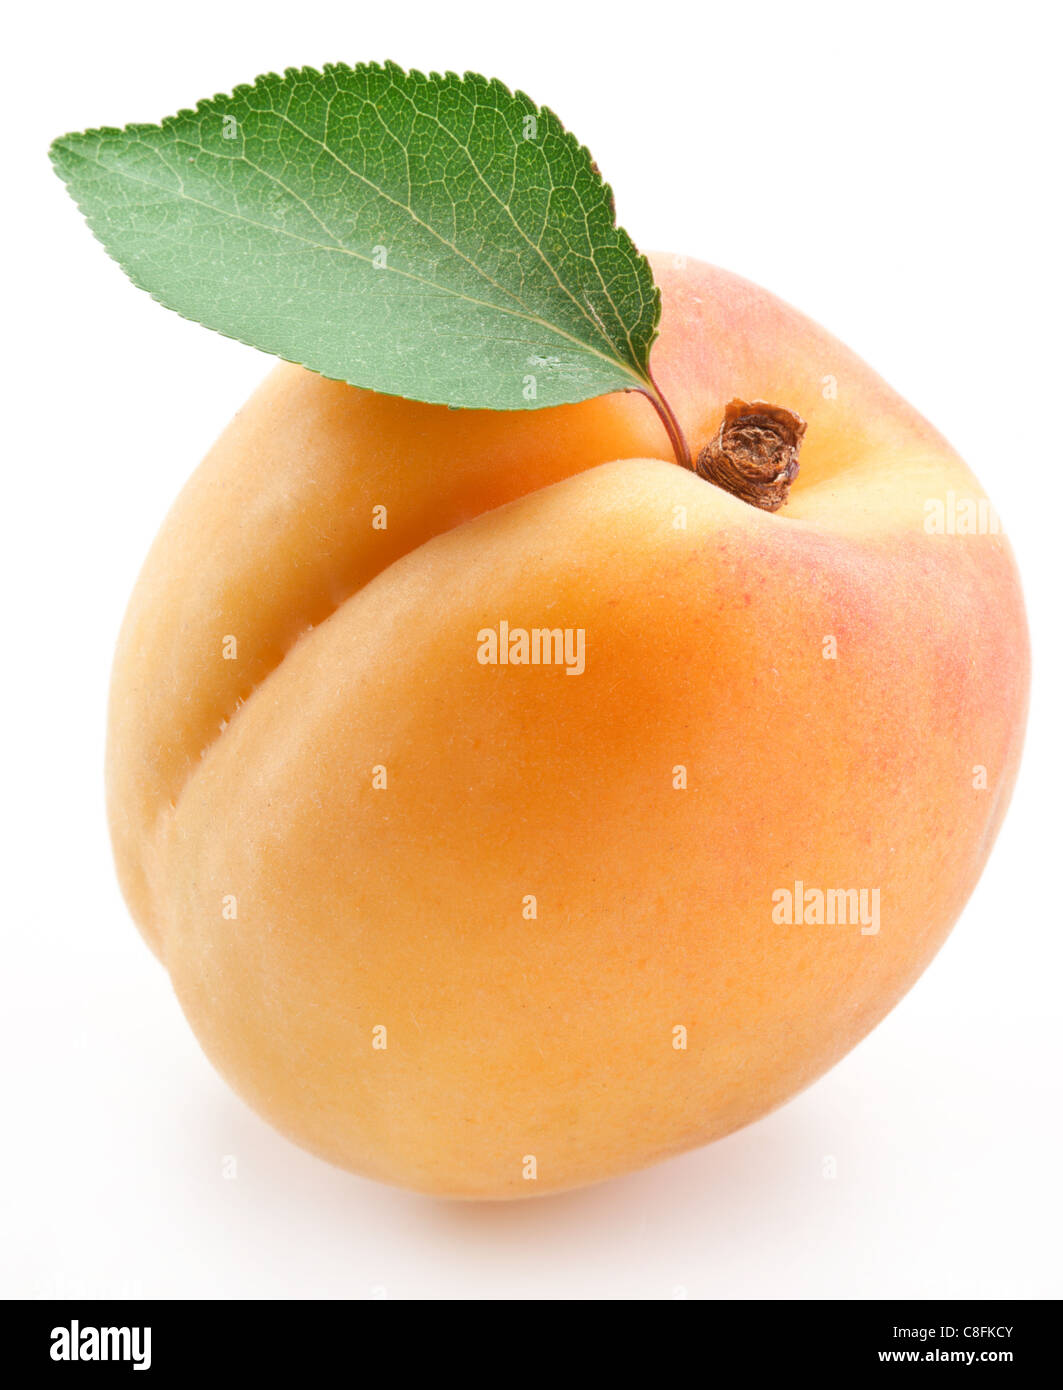 Apricot with leaf on a white background. Stock Photo